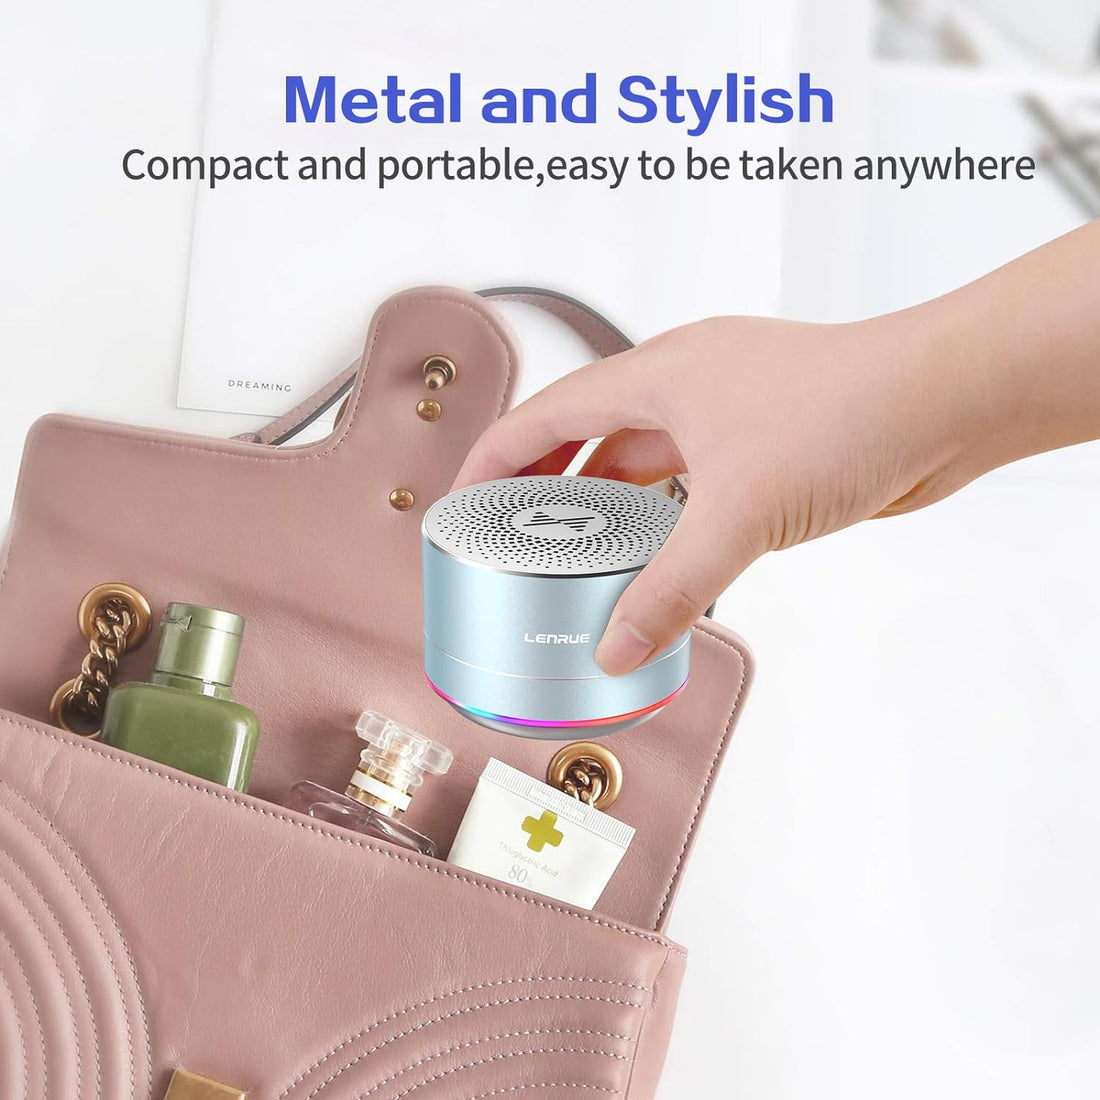 LENRUE - Portable Bluetooth Speakers, Wireless Speaker with Clear Sound, Long Playing Time, Small Mini Metal Speaker, Christmas Birthday Gifts for Men Women Kids (Sky Blue)